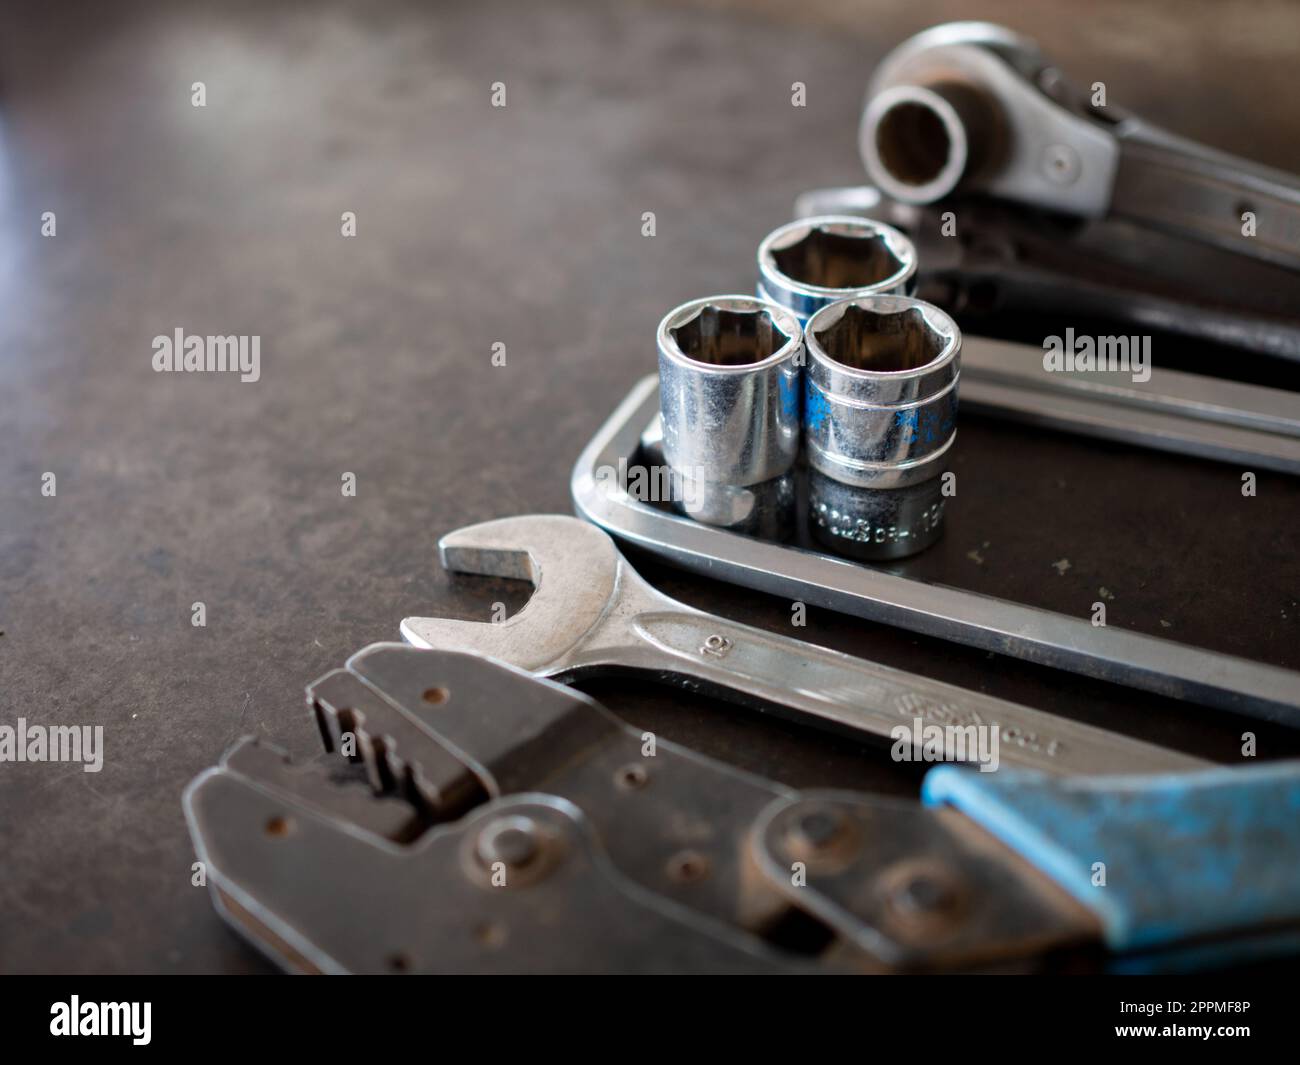 Hand tools consisting of wrenches, pliers, socket wrenches, laid out on old steel plate background. Stock Photo